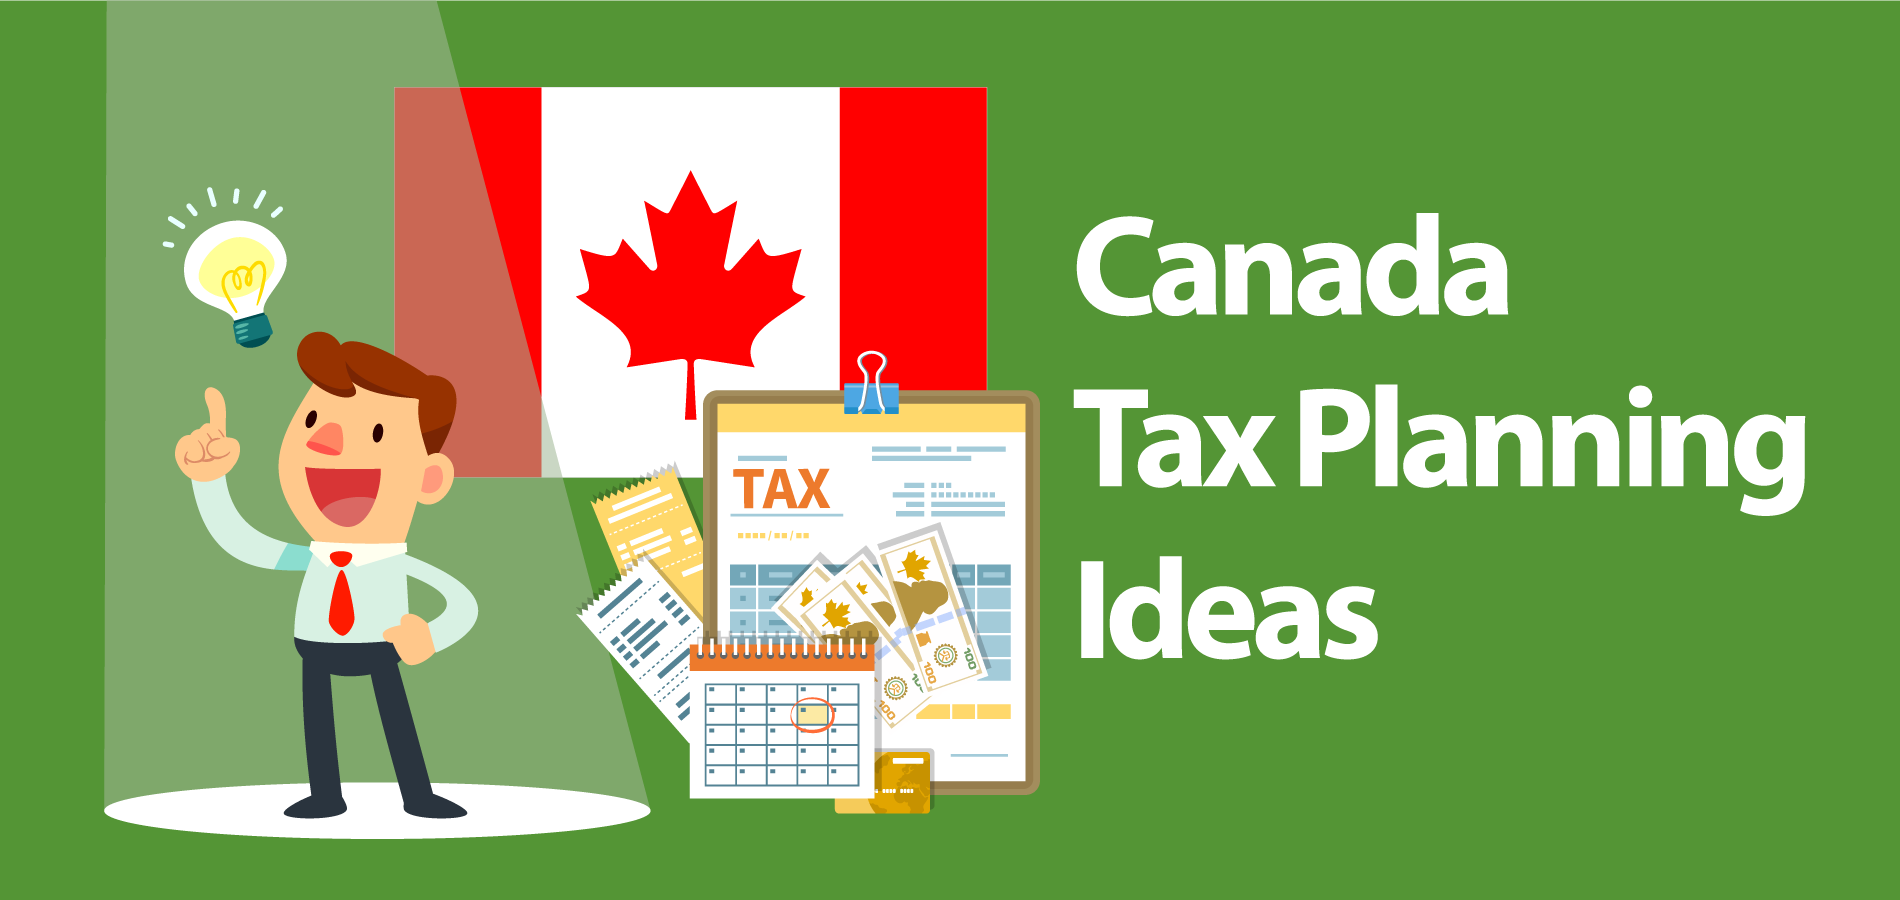 Setting up a business in Canada? Know the tax-related issues